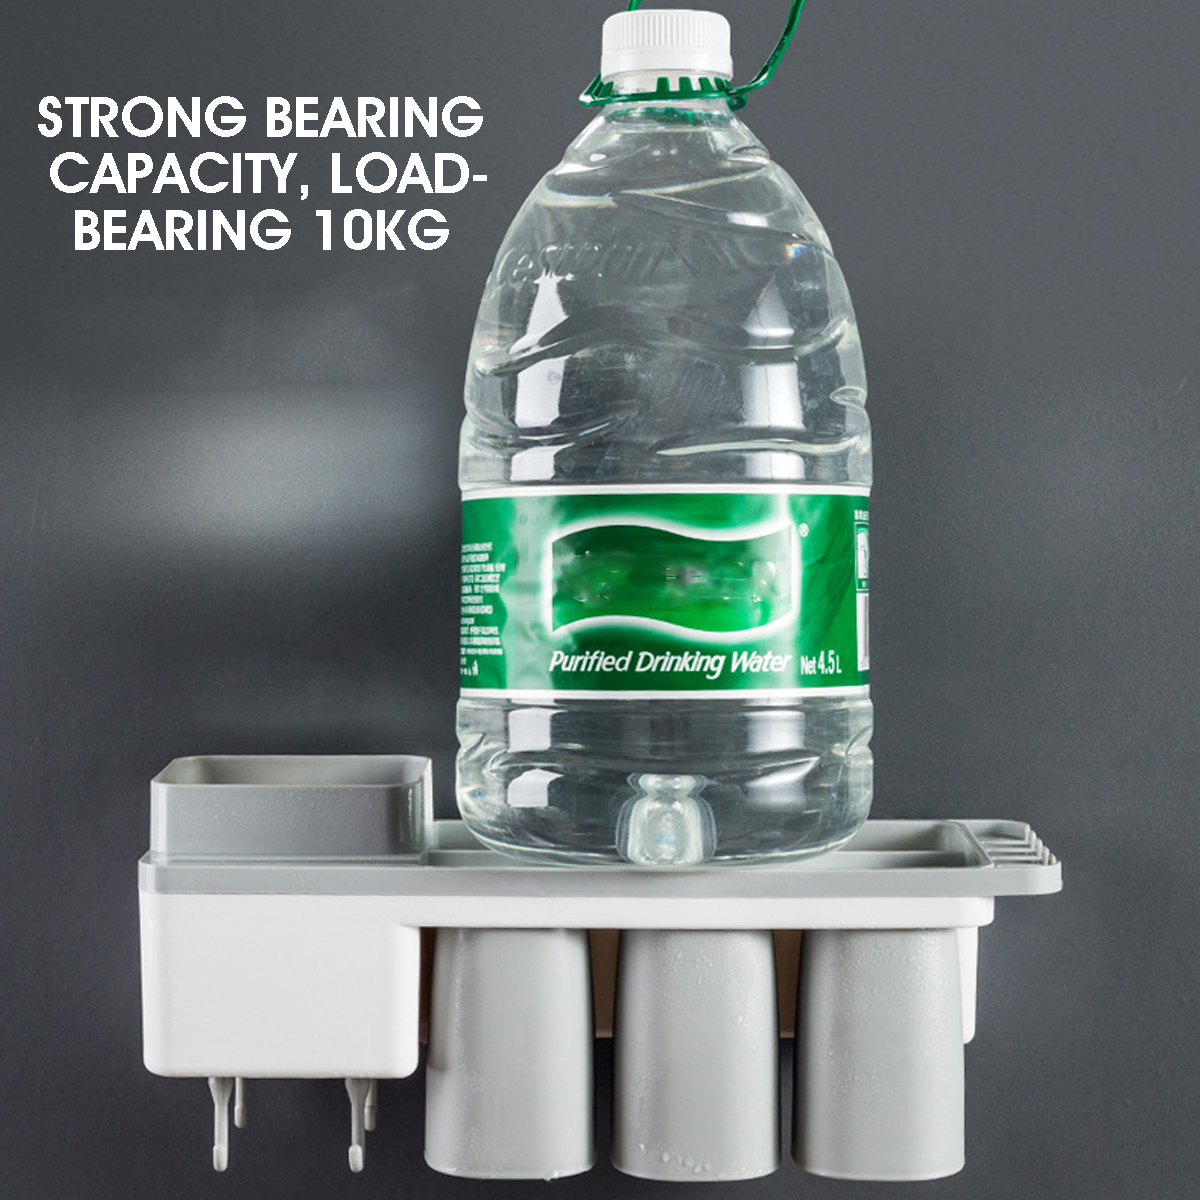 34-Cups-Magnetic-Toothbrush-Rack-Strong-Bearing-Toothbrush-Holder-Toothpaste-Holder-1769031-3